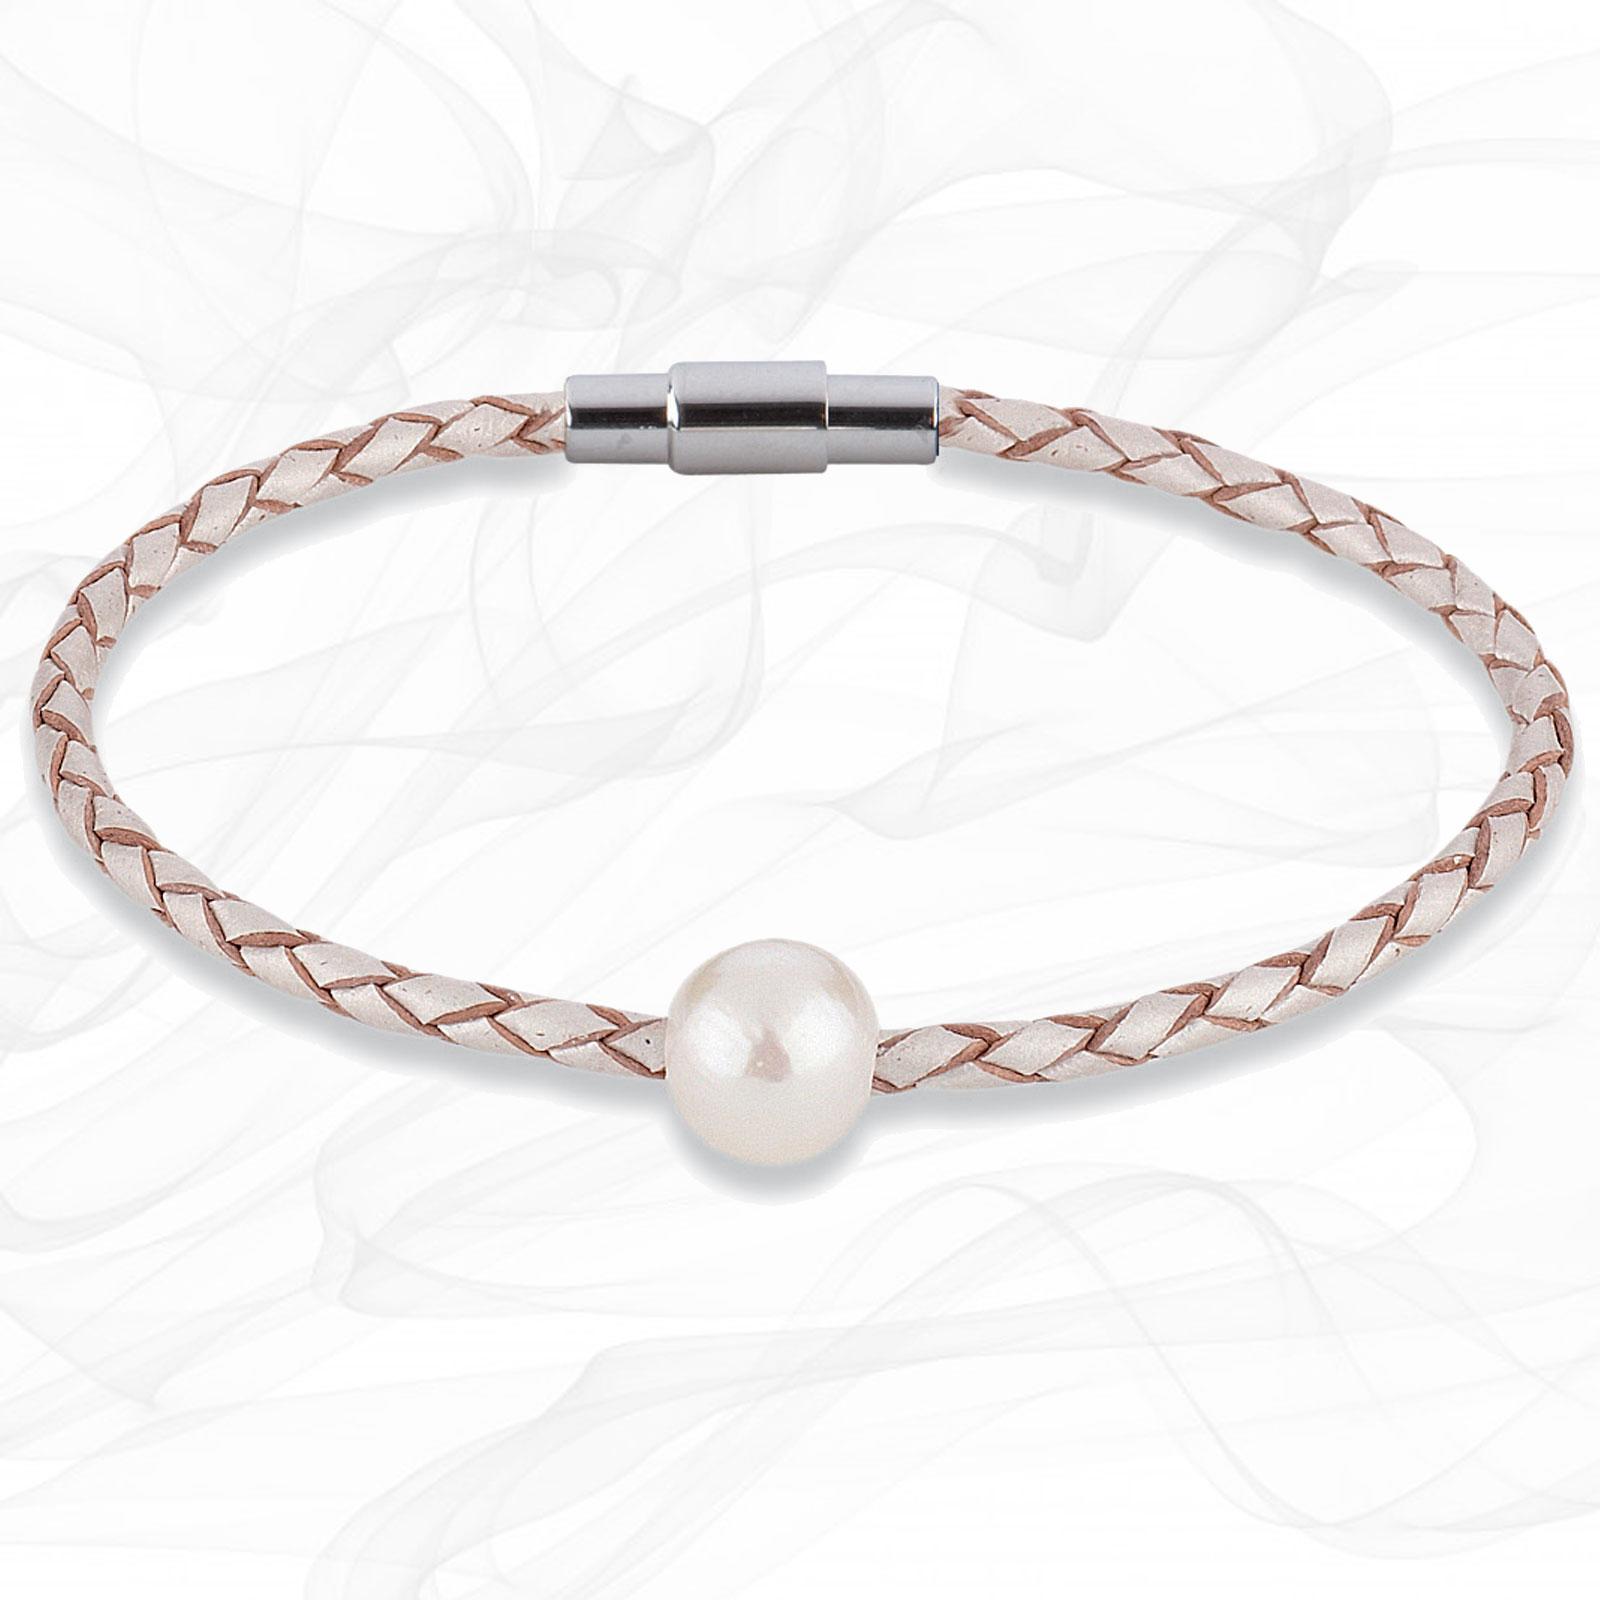 PEARLY WHITE FRESH WATER CULTURED PEARL LEATHER BRACELET